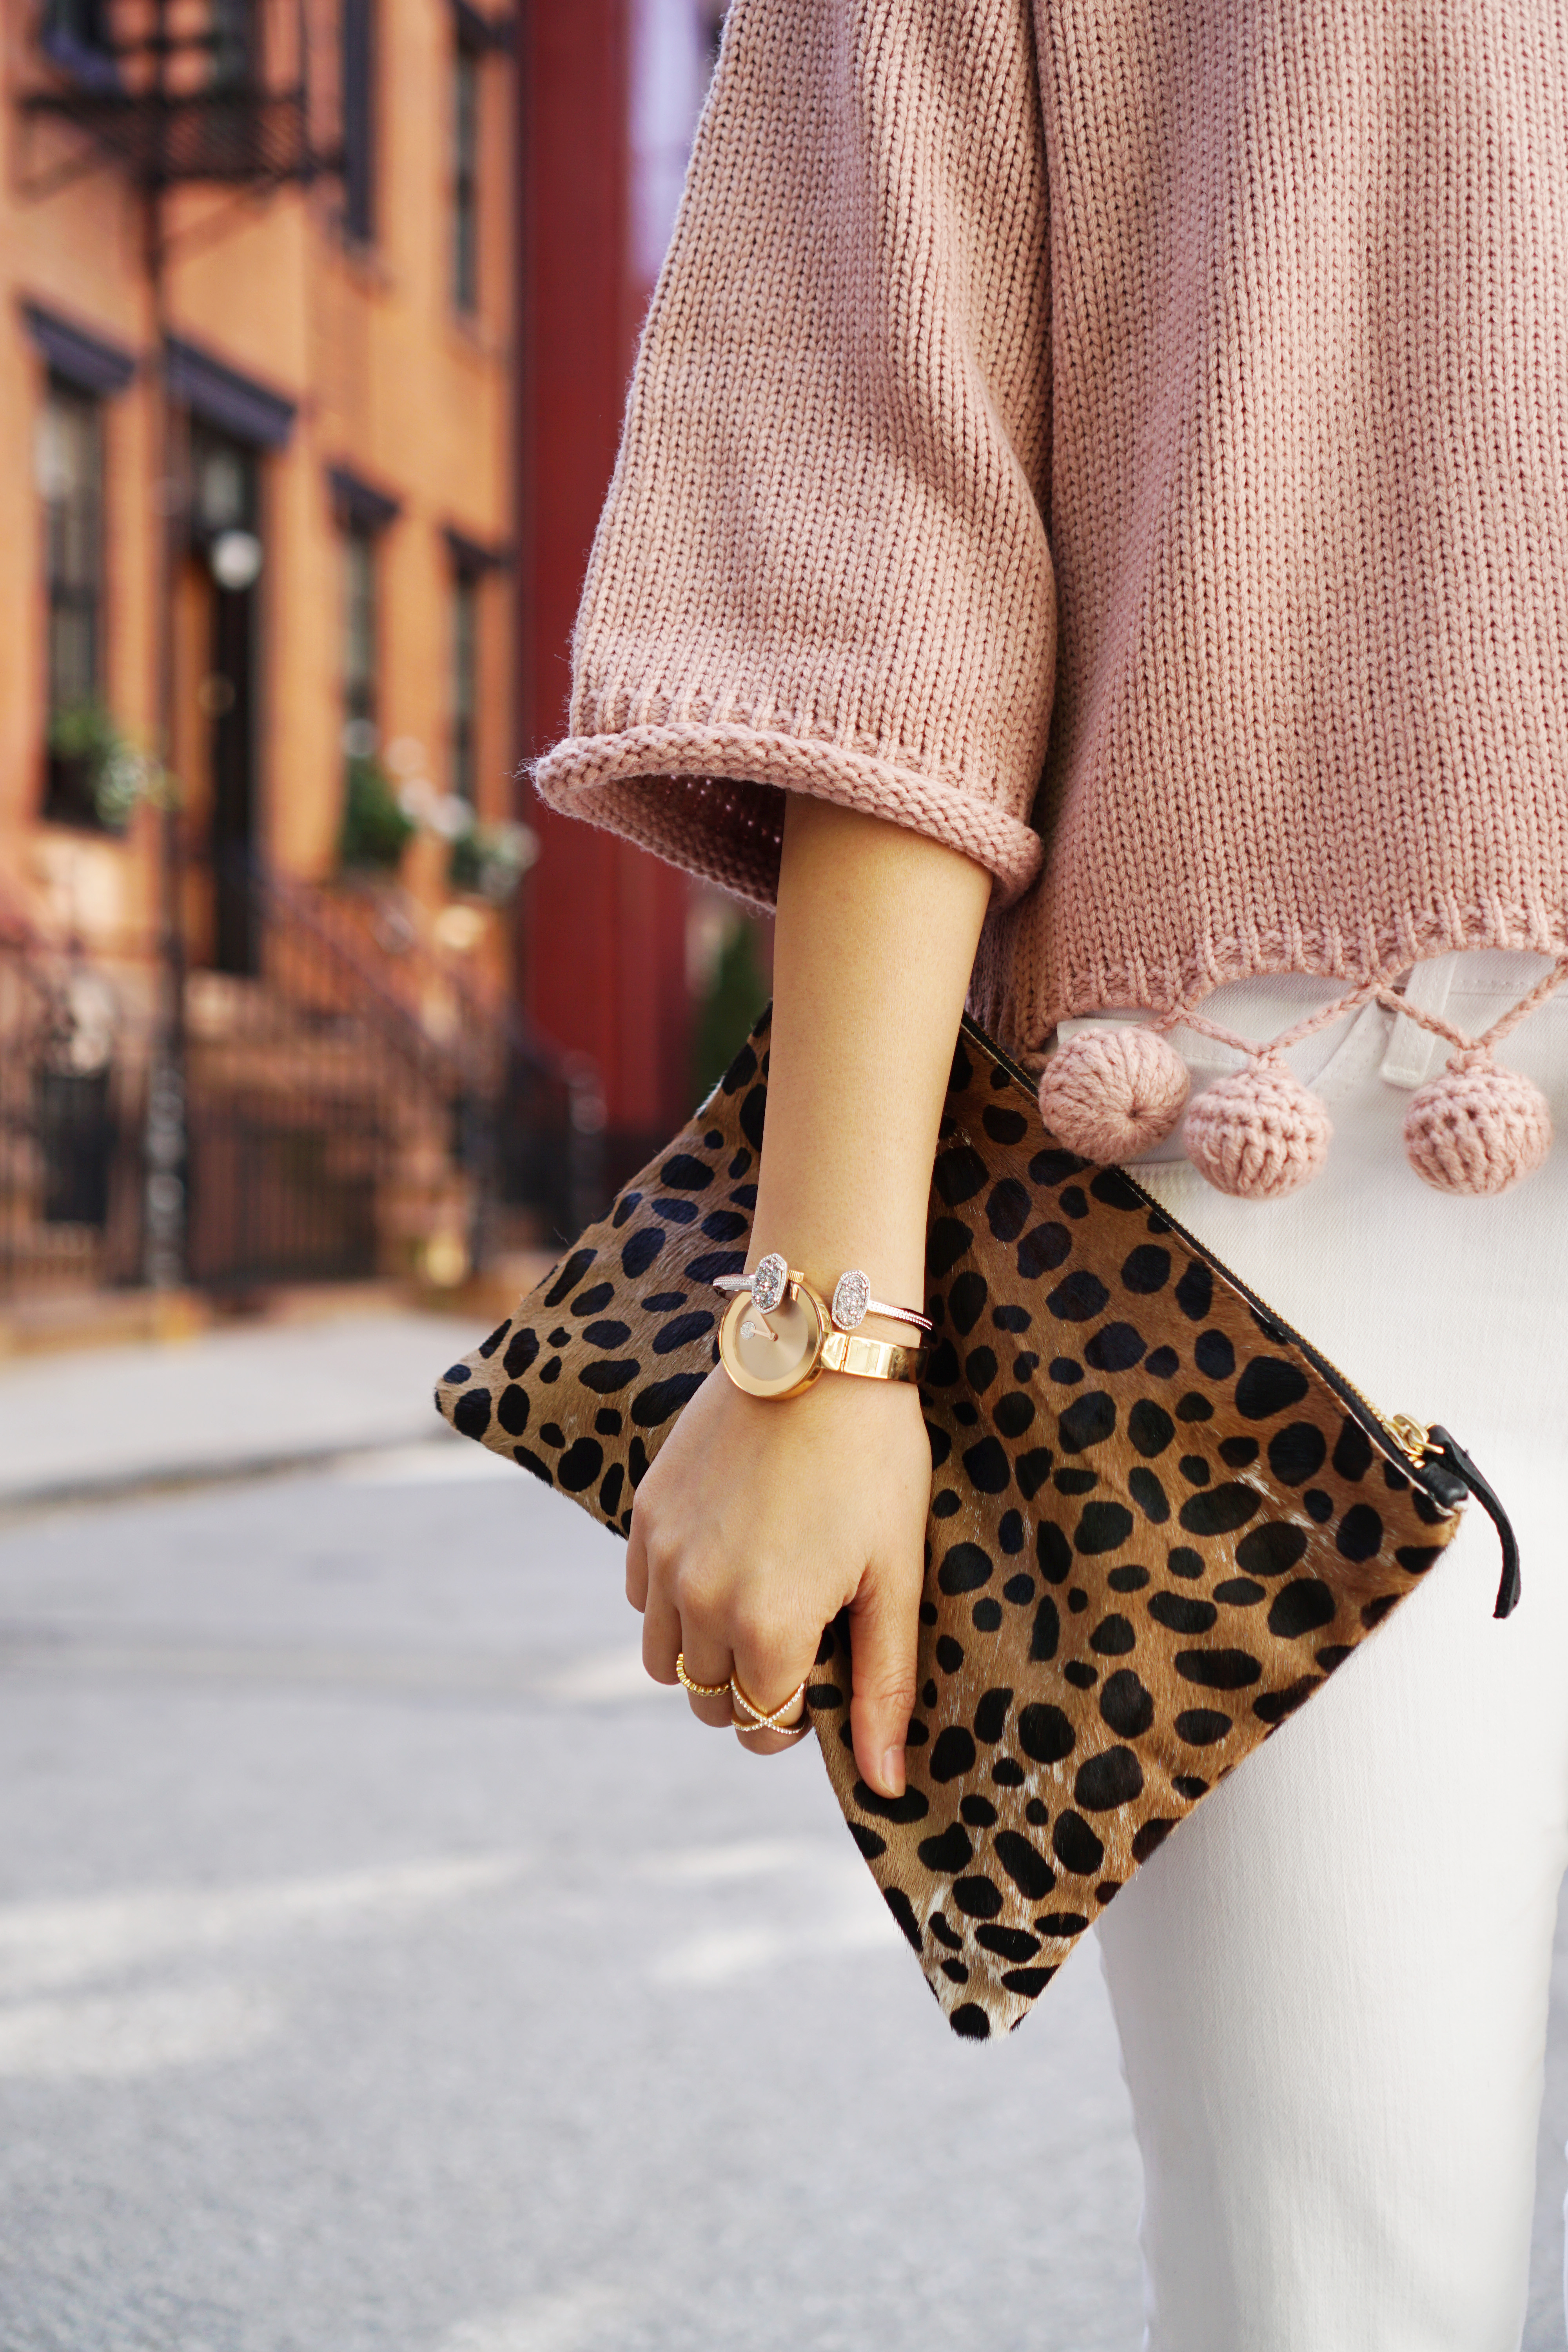 Skirt The Rules / Leopard Clutch